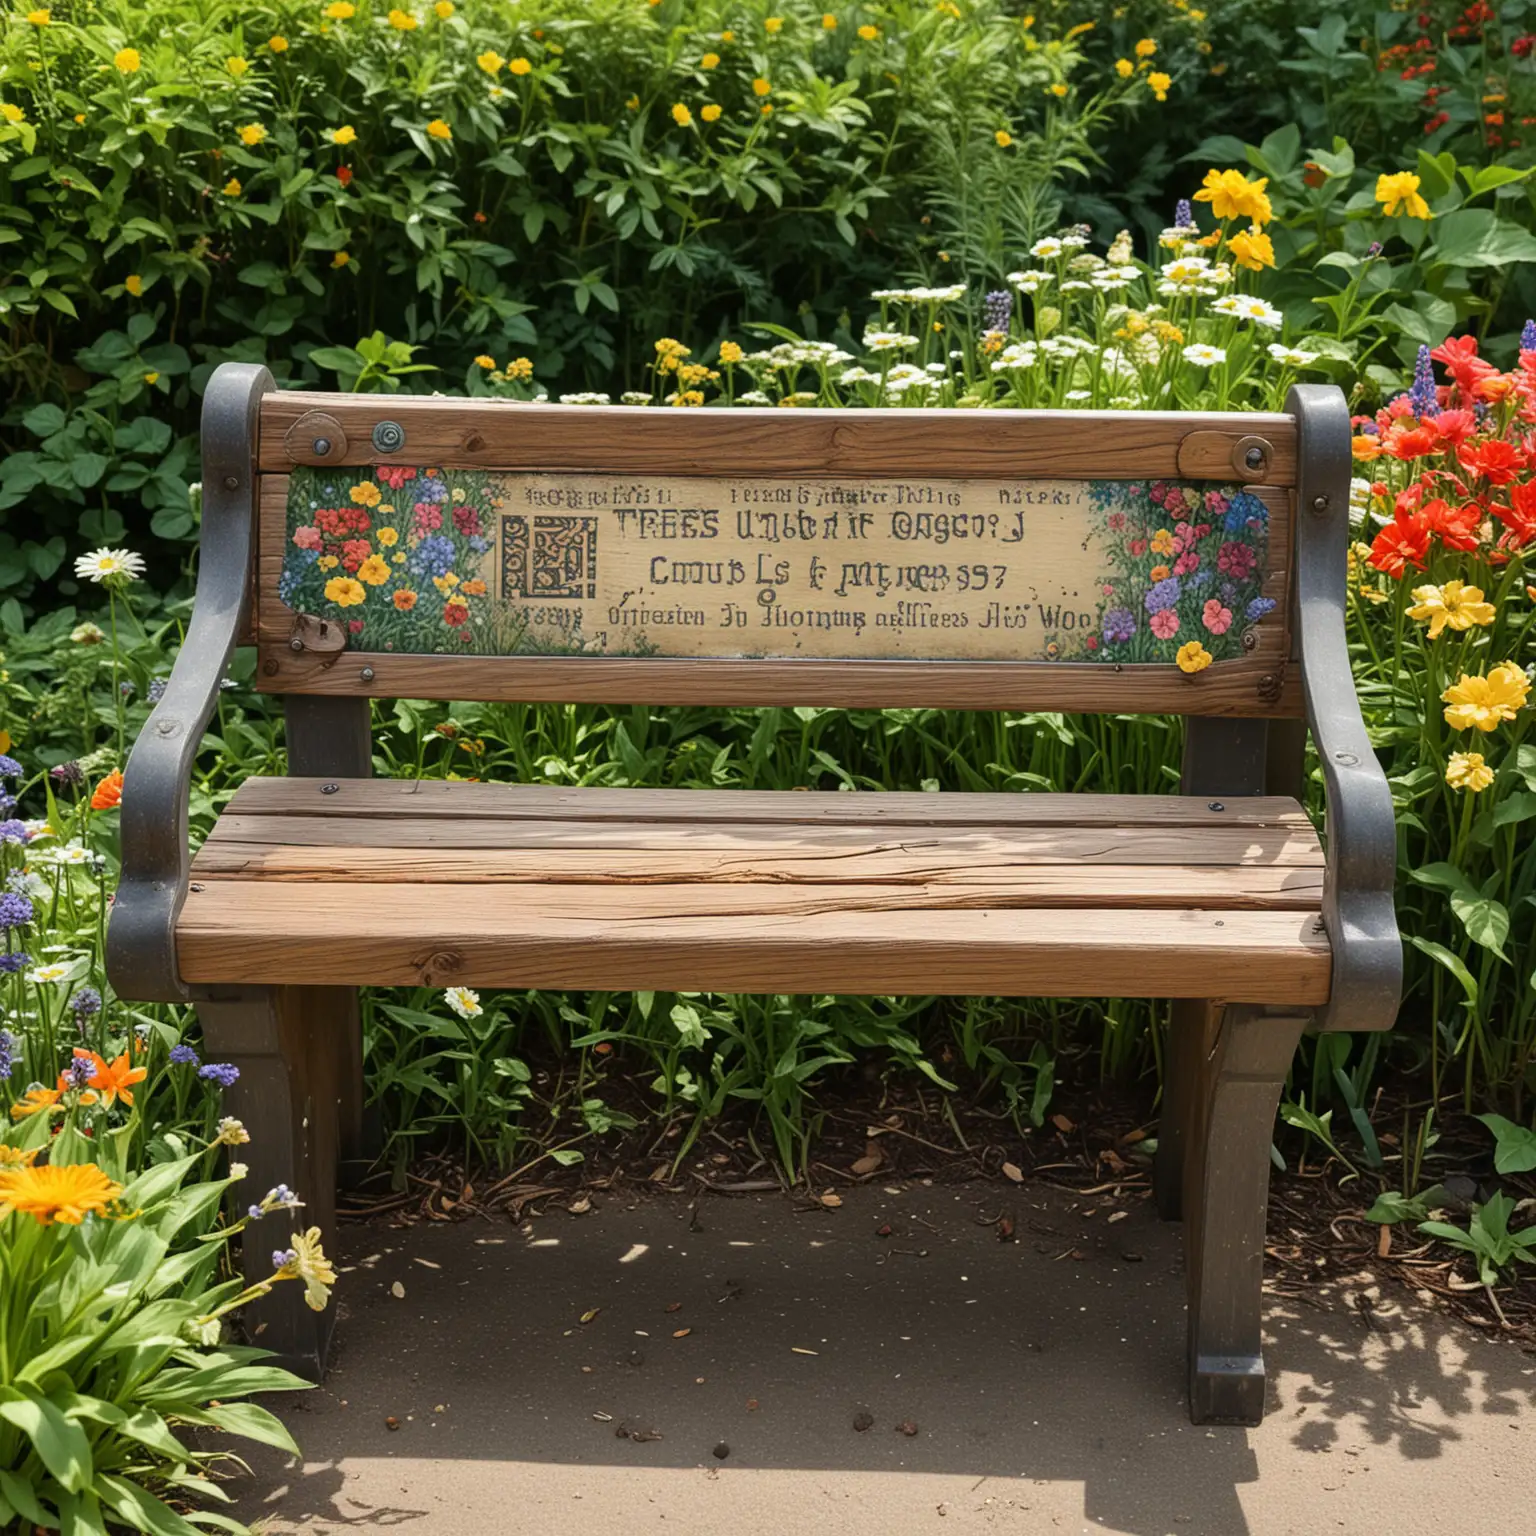 A rustic wooden park bench situated in a picturesque garden filled with colorful flowers and lush greenery. The bench features a small metal plate securely screwed onto its backrest. The metal plate prominently displays an engraved QR code. Next to the plate, 'James Johns' is meticulously engraved into the wooden backrest. The scene is serene, with sunlight filtering through the trees, casting gentle shadows across the bench and garden.